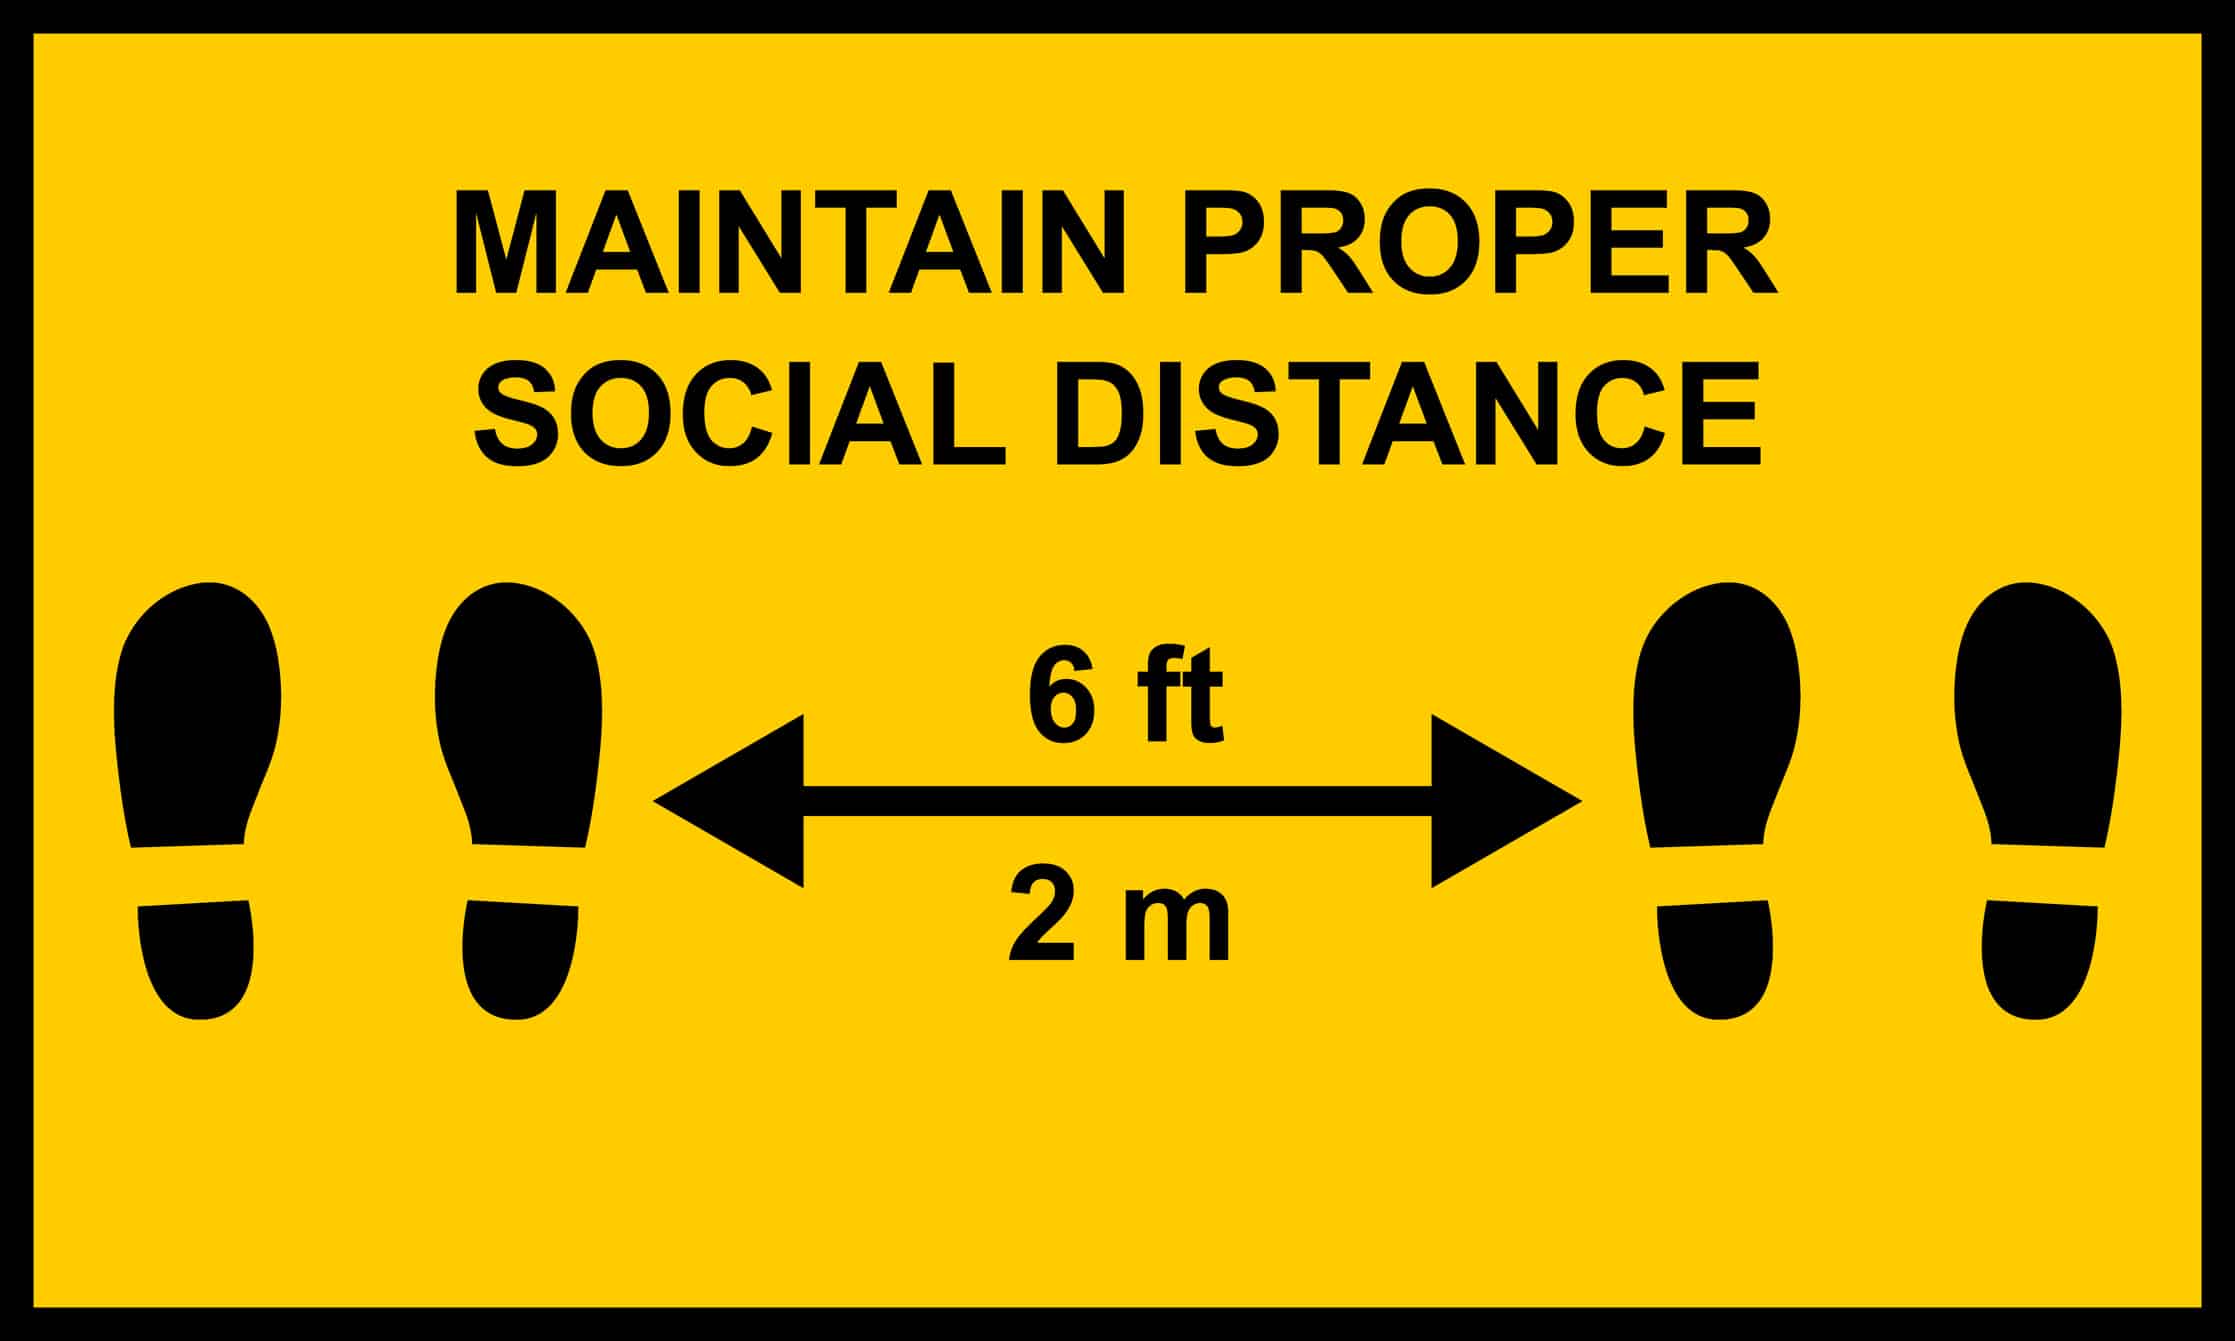 Warning sign reminding people to socially distance.